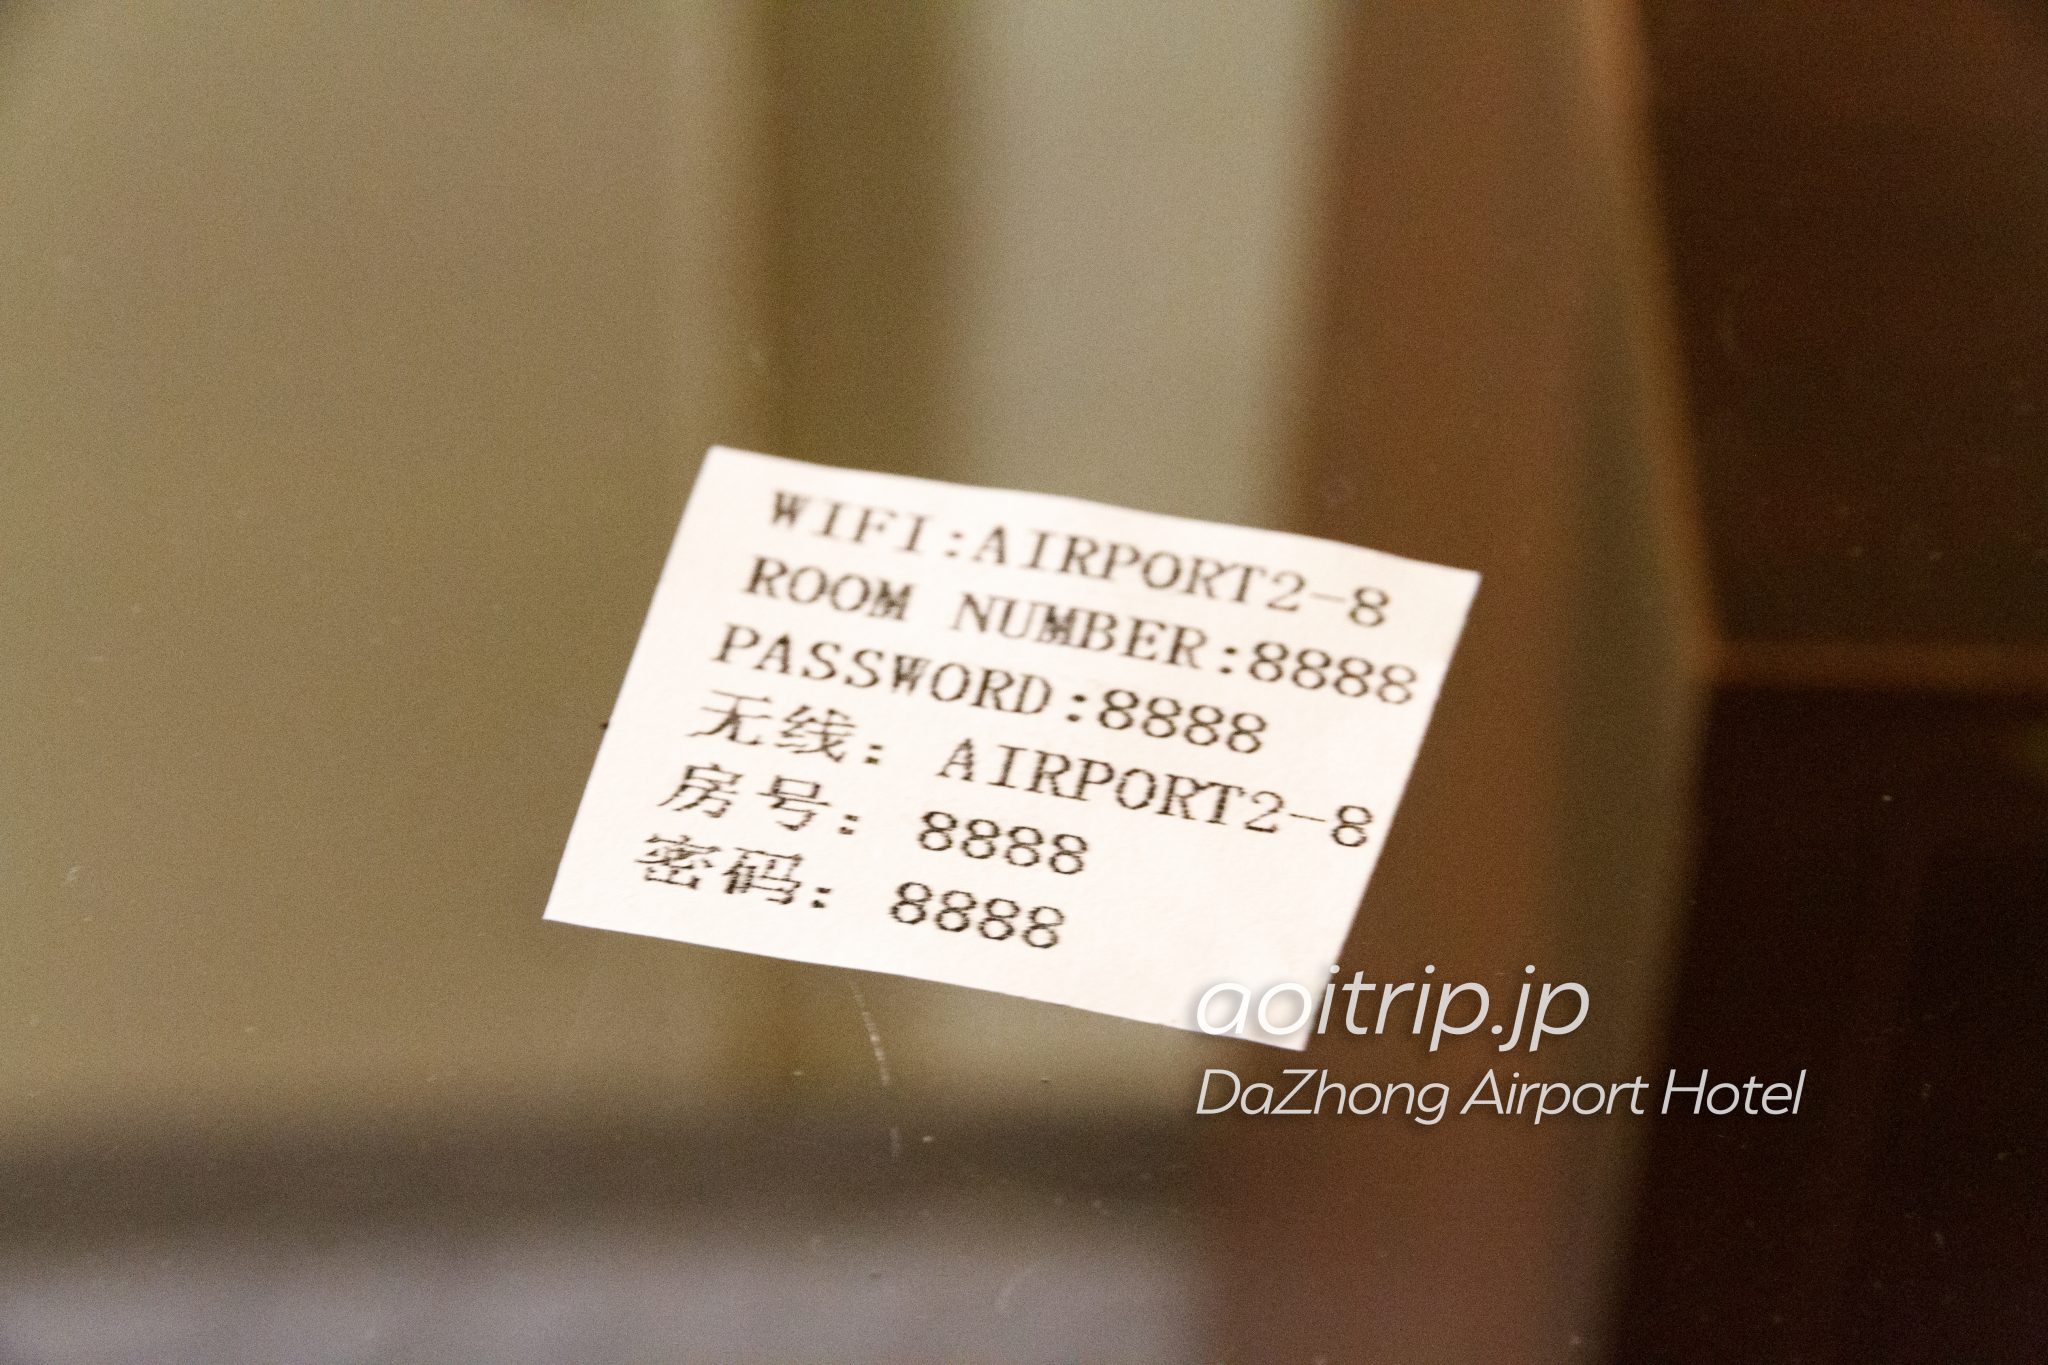 dazhong airport hotel wifi id and password